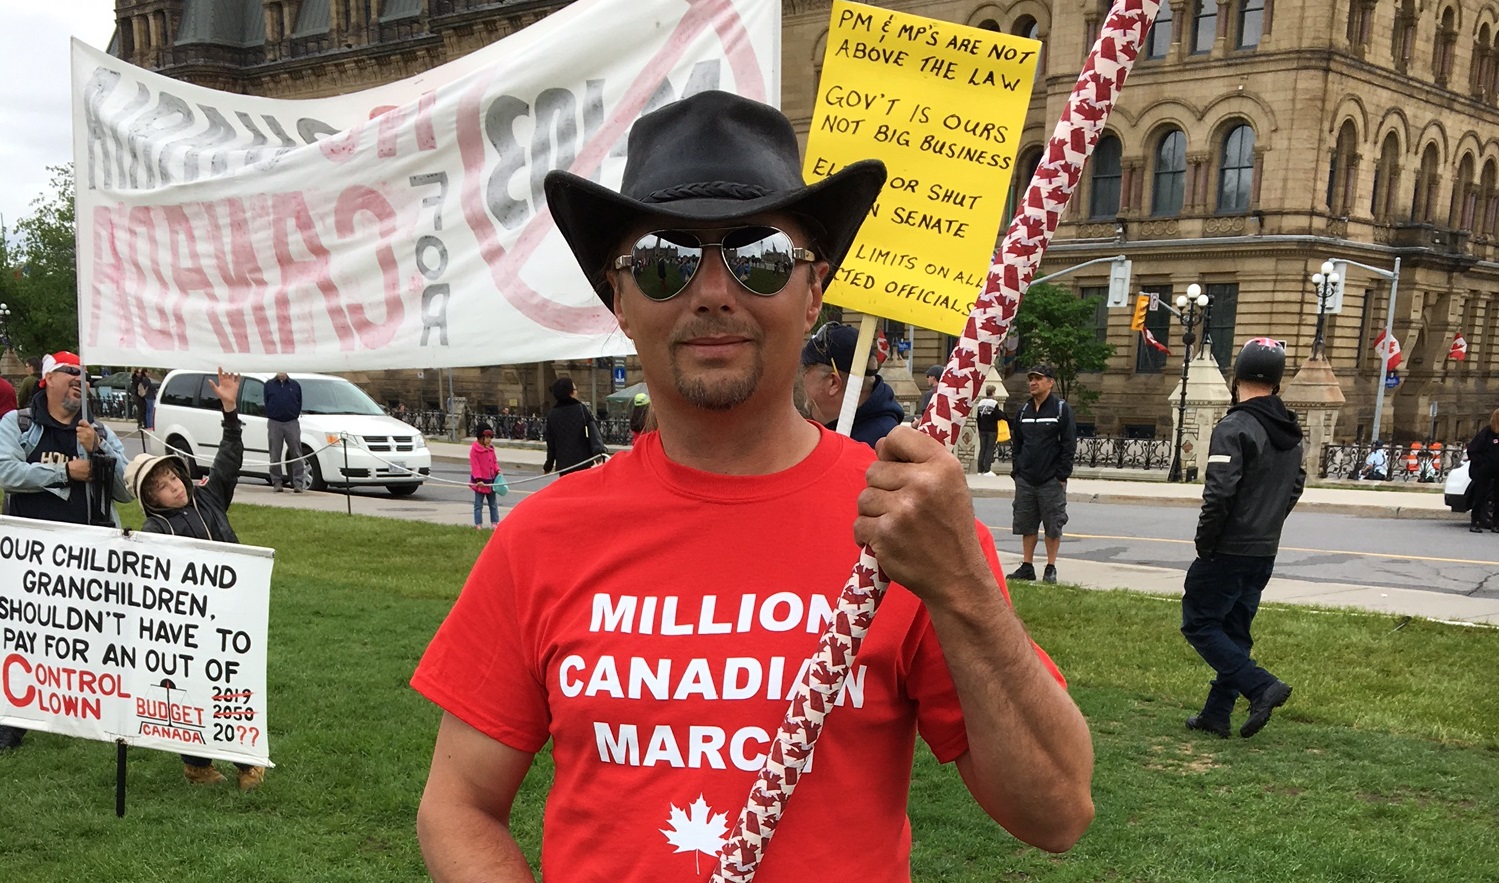 Million Canadian Deplorables March organizer Mike Wain stands in front of Canada's Parliament Hill. Daily Caller photo